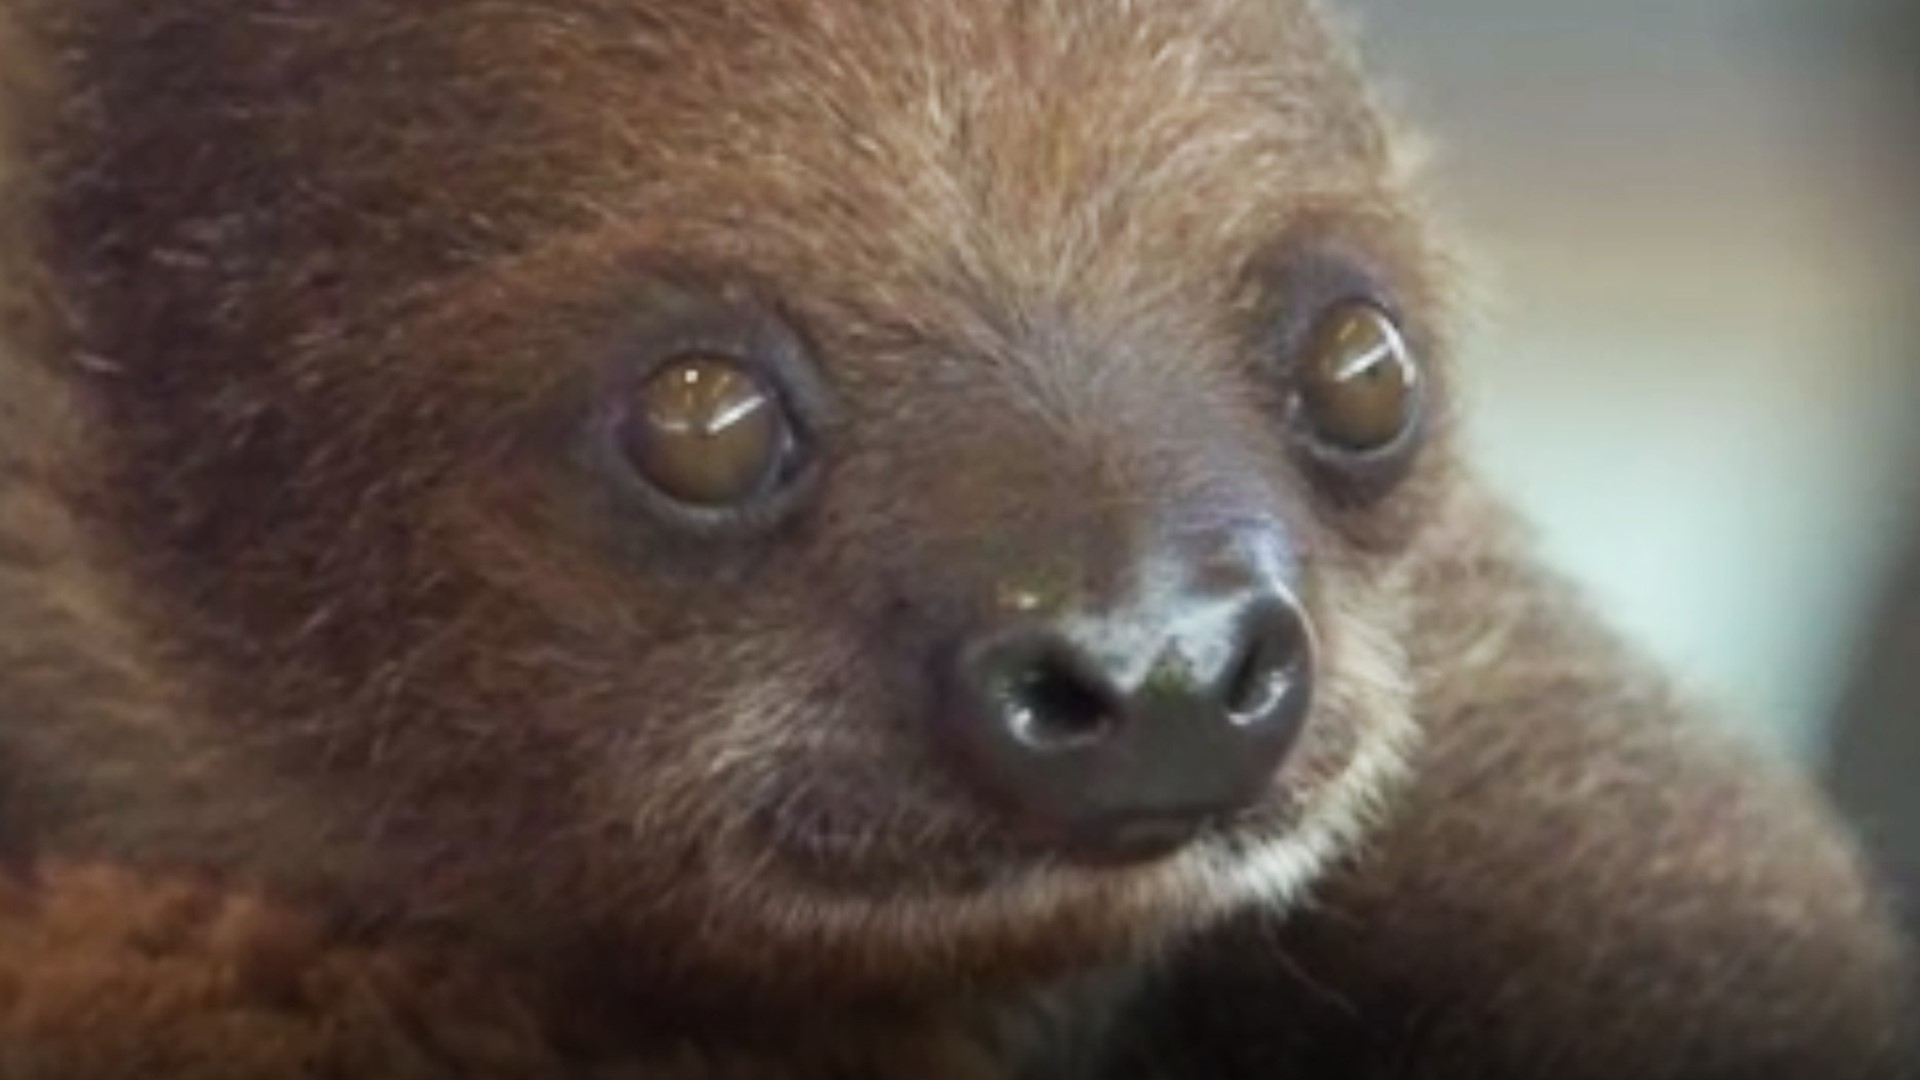 Brookfield Zoo is introducing its newest members to the public - a 7-month-old Linnaeus’s two-toed sloth named T-Mo.